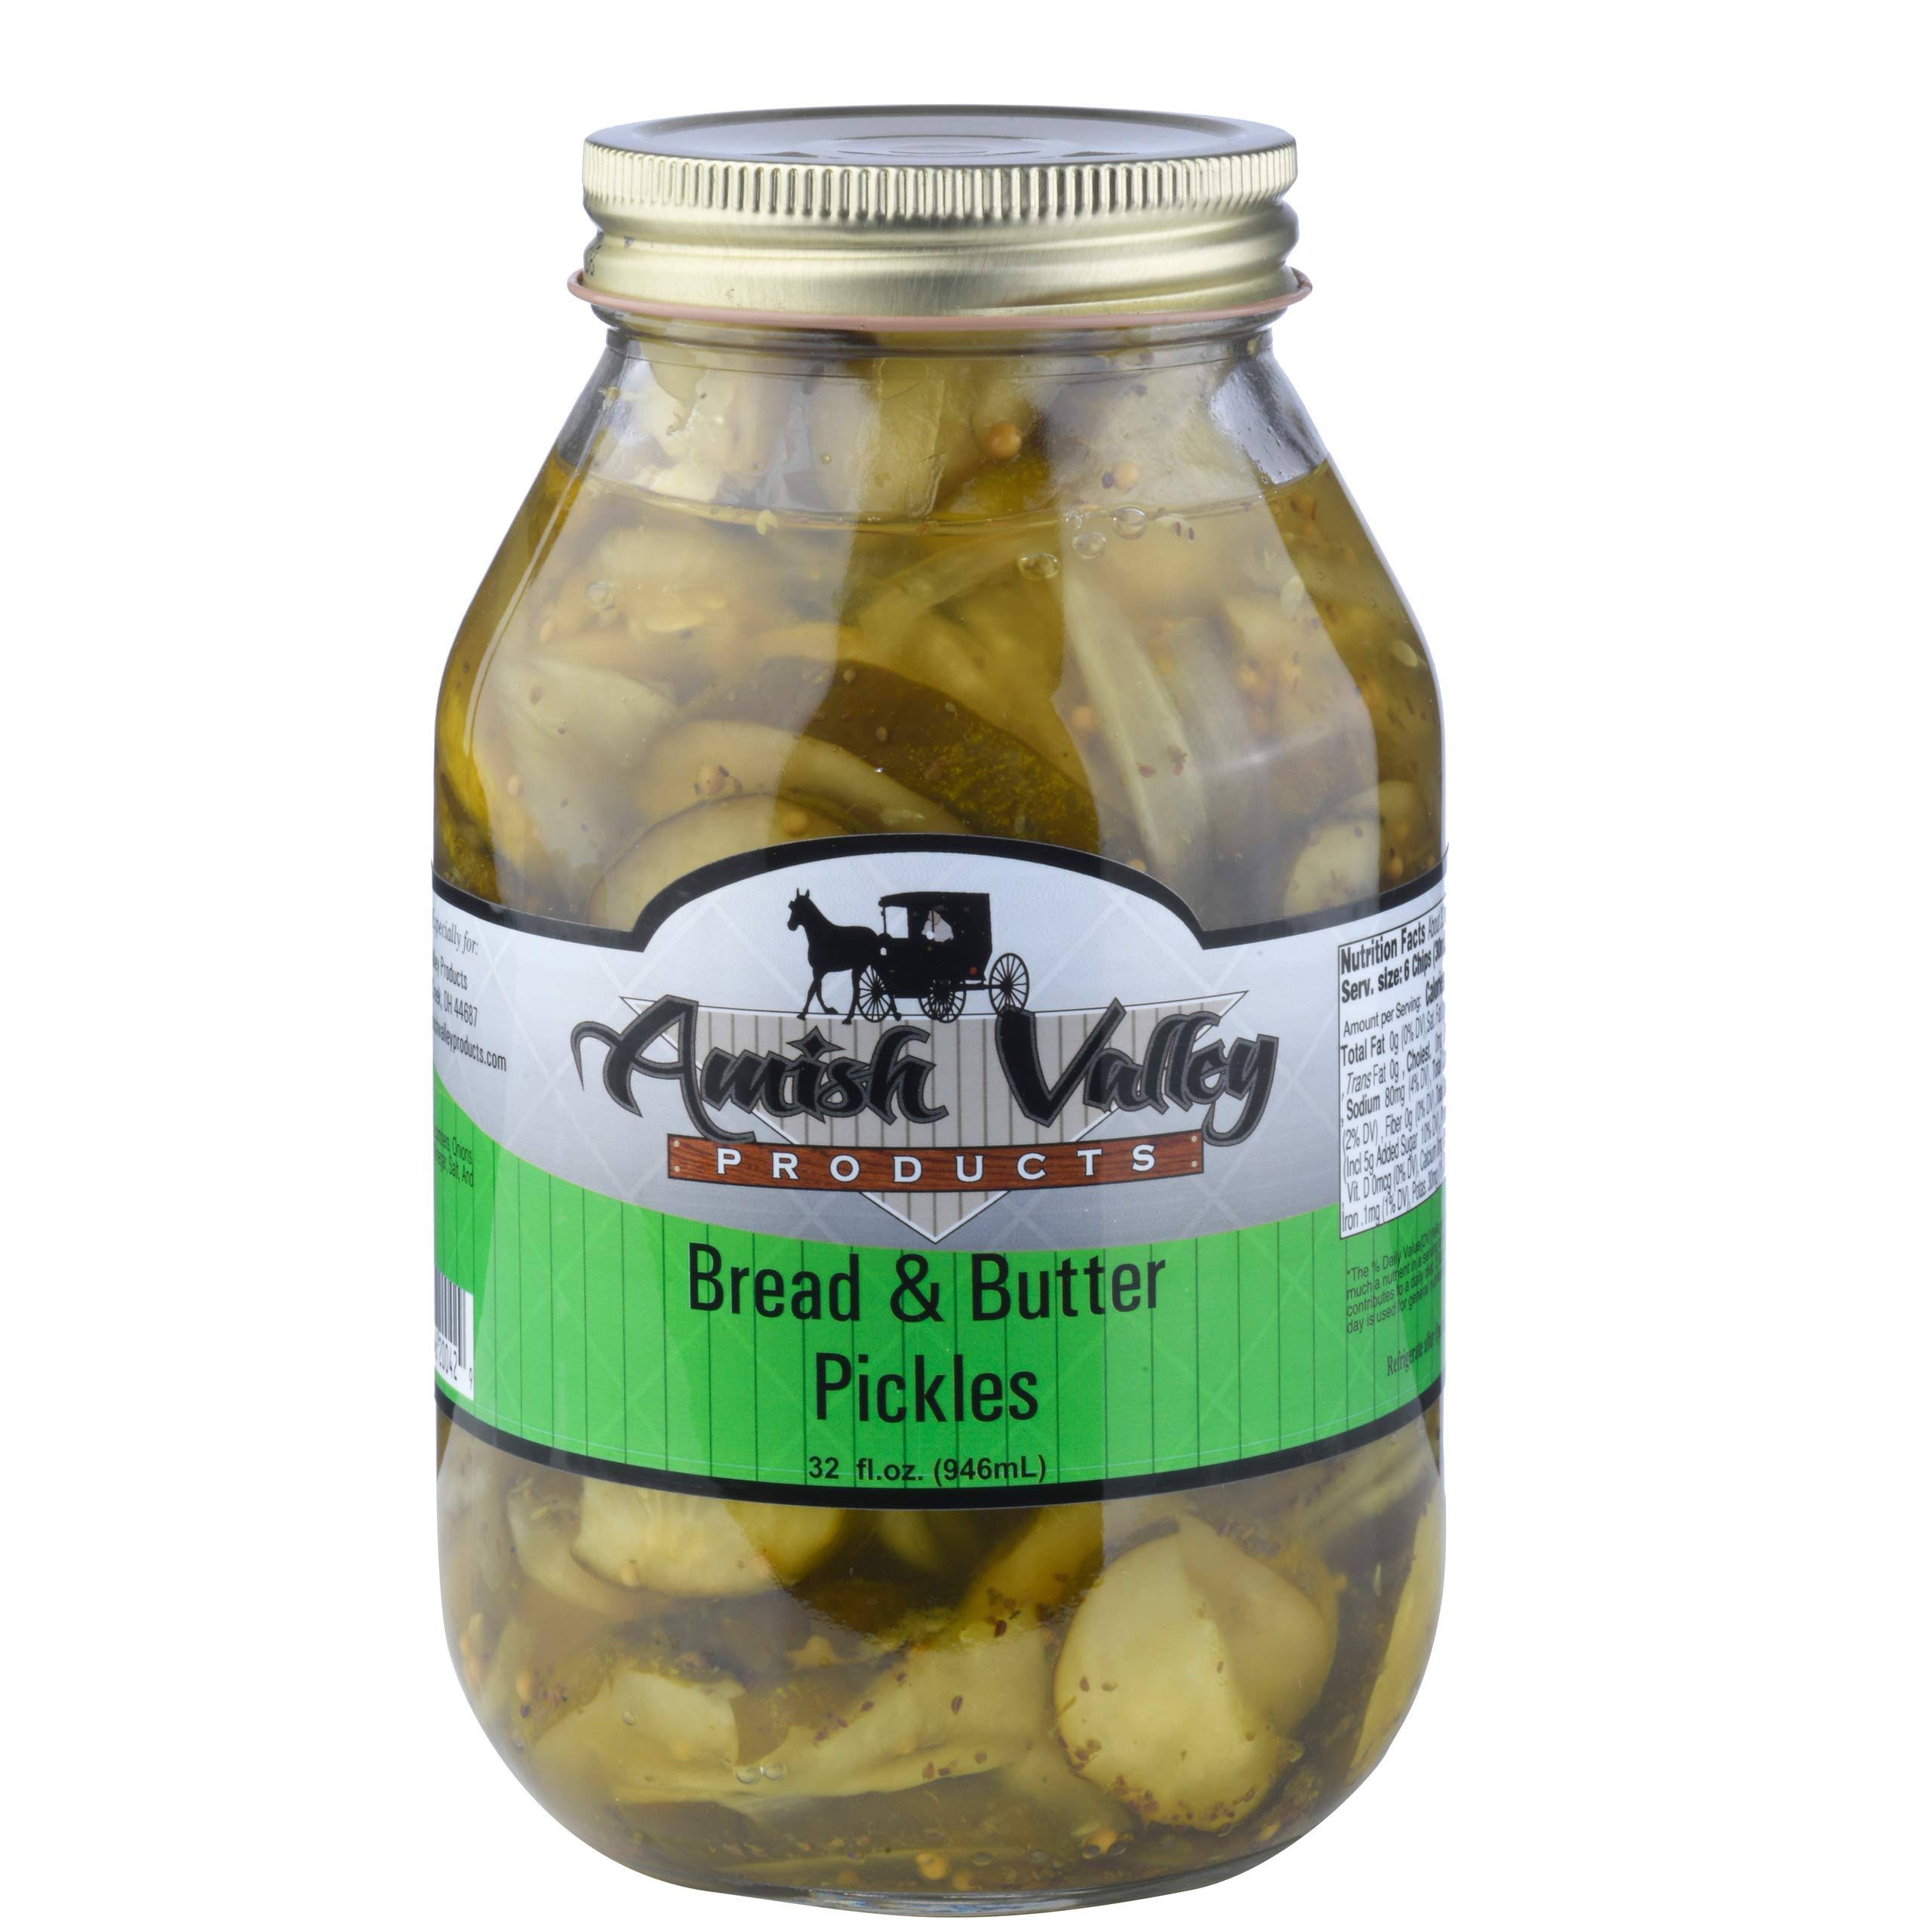 Amish Valley Products Bread and Butter Pickles Glass Quarts All Natural (One qt Jar - 32oz)